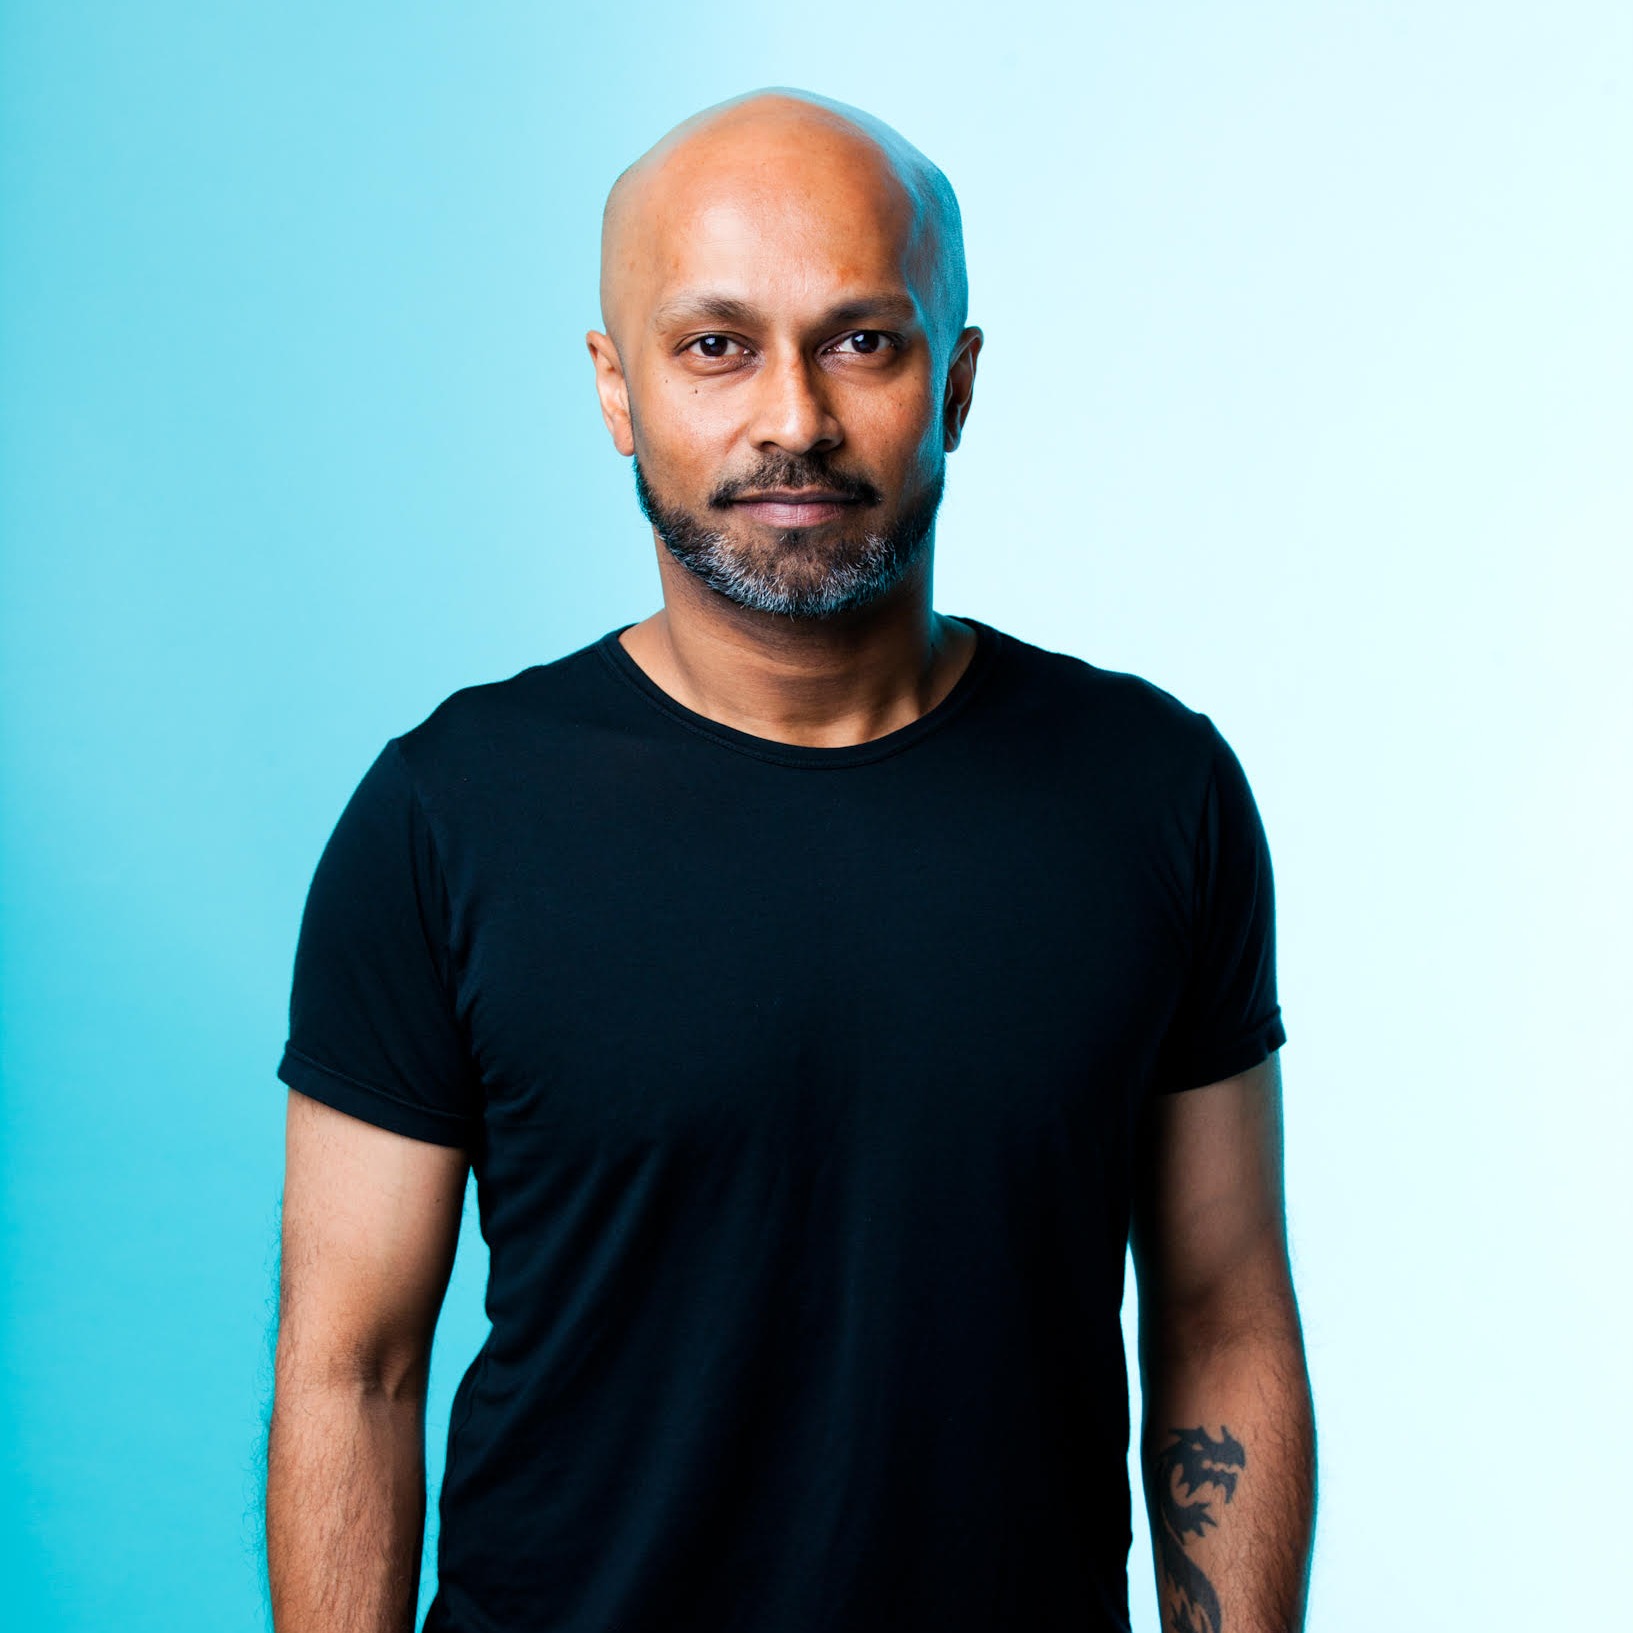 Dancer Akram Khan on performing the unimaginable, theater of war